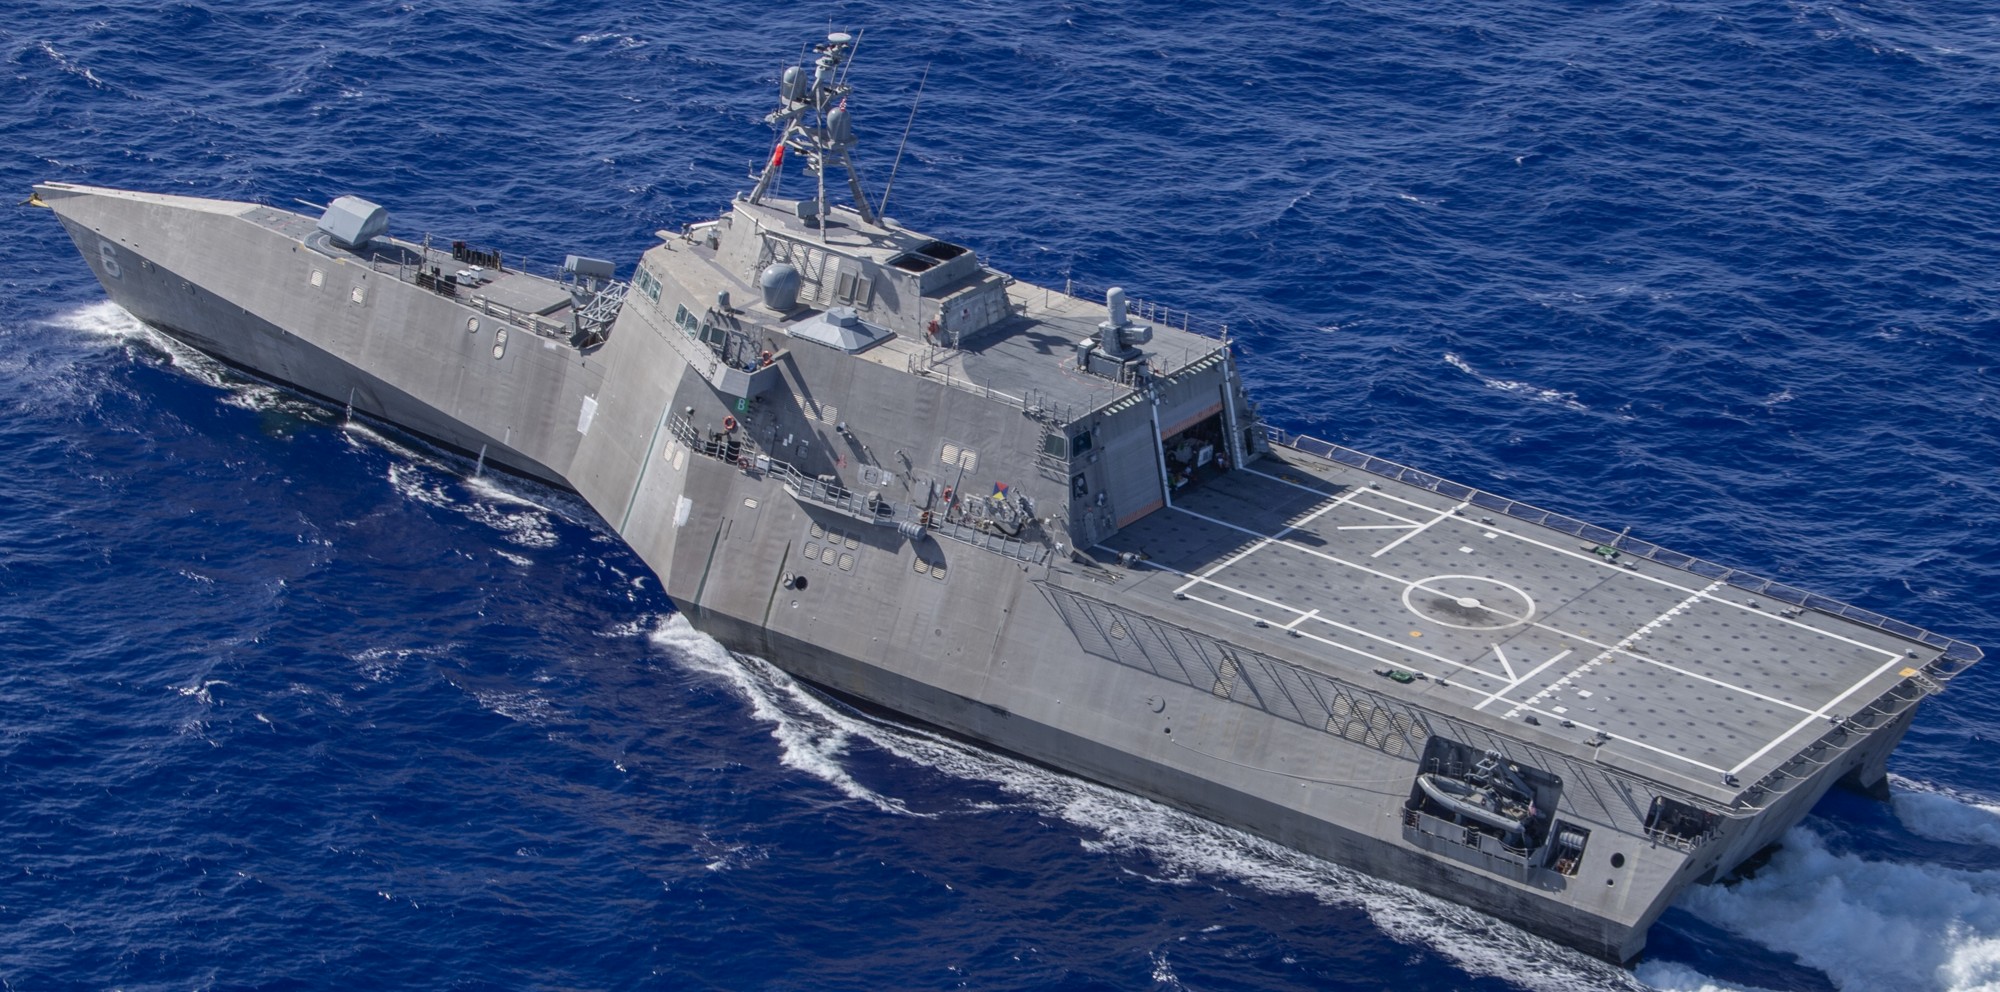 lcs-6 uss jackson independence class littoral combat ship us navy pacific ocean 30